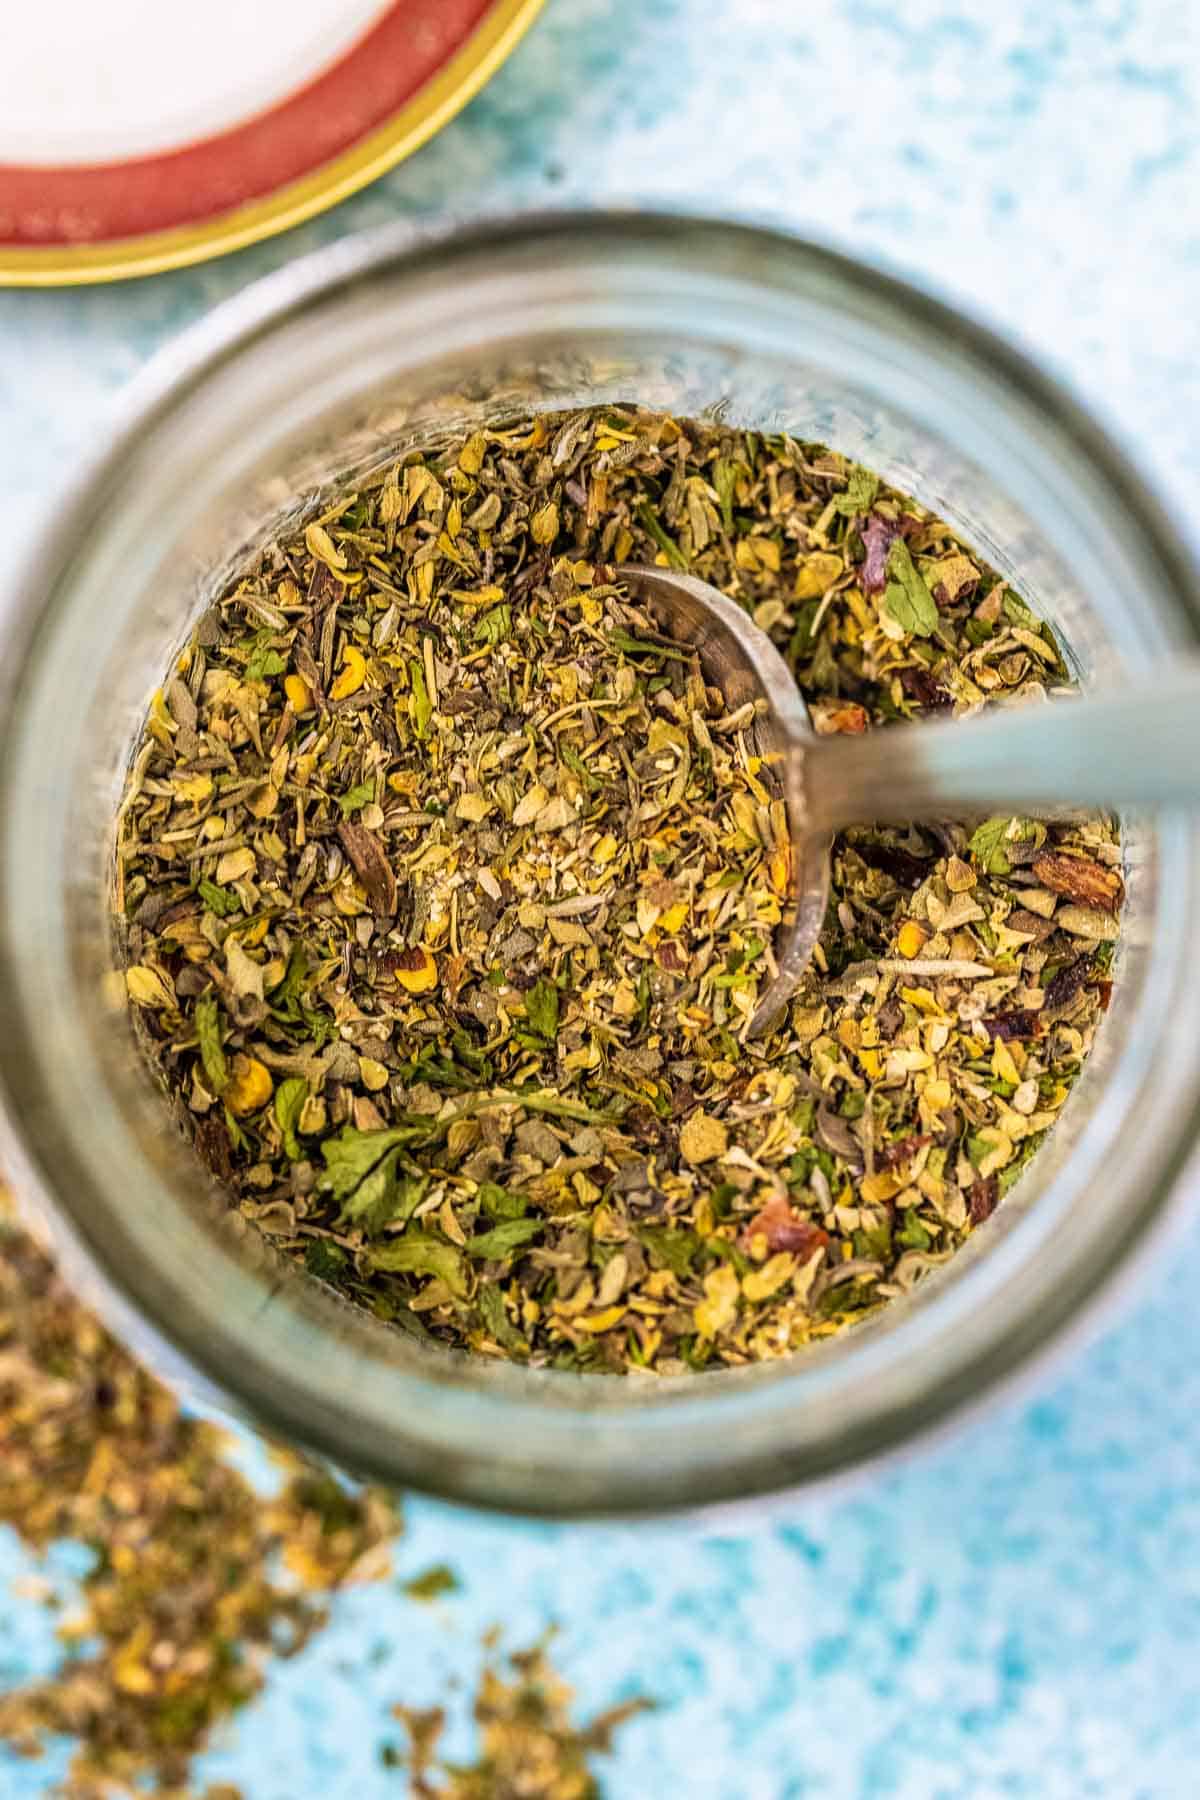 Quick Guide to Every Herb and Spice in the Cupboard